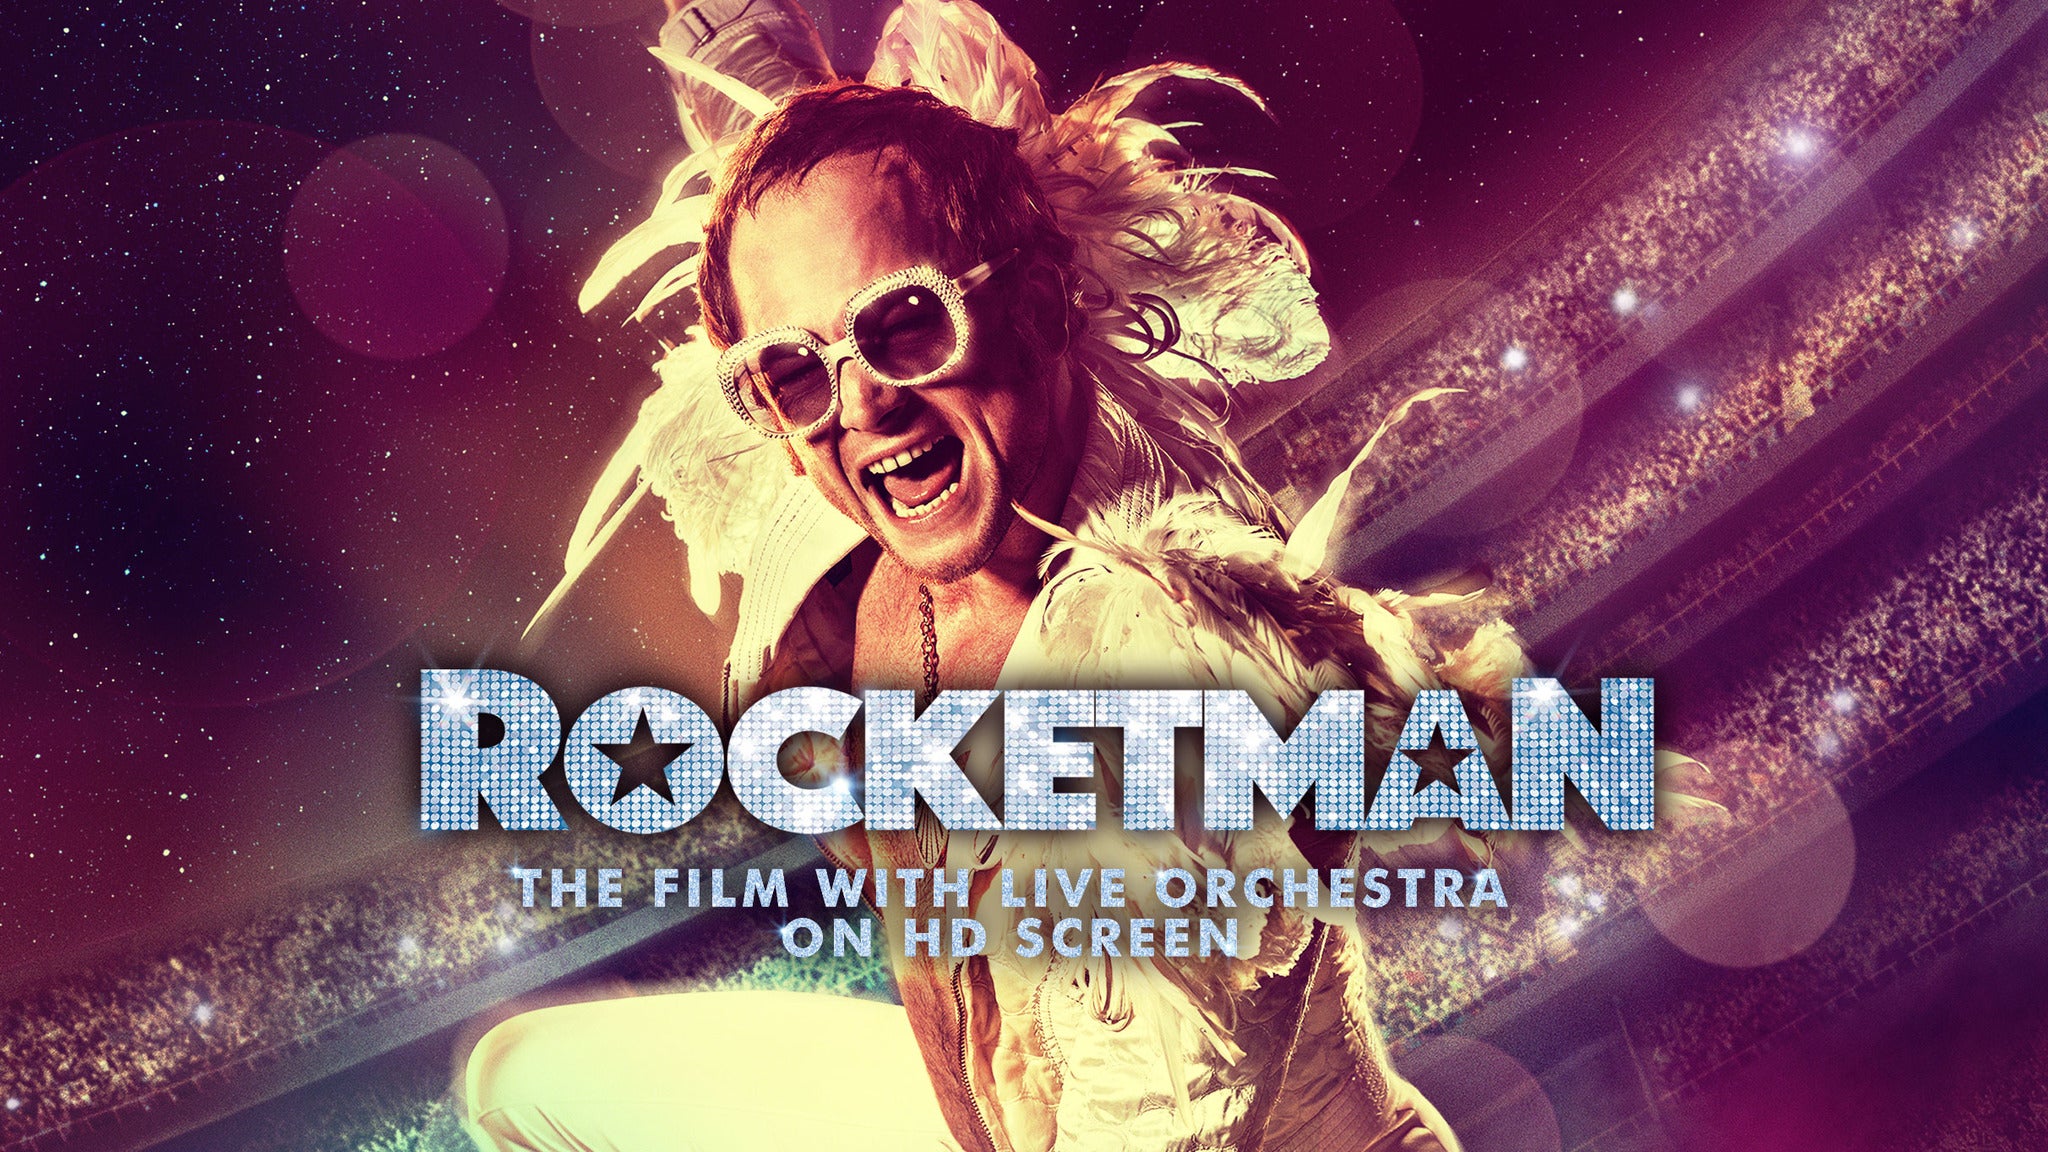 Rocketman In Concert - The Film with Live Orchestra